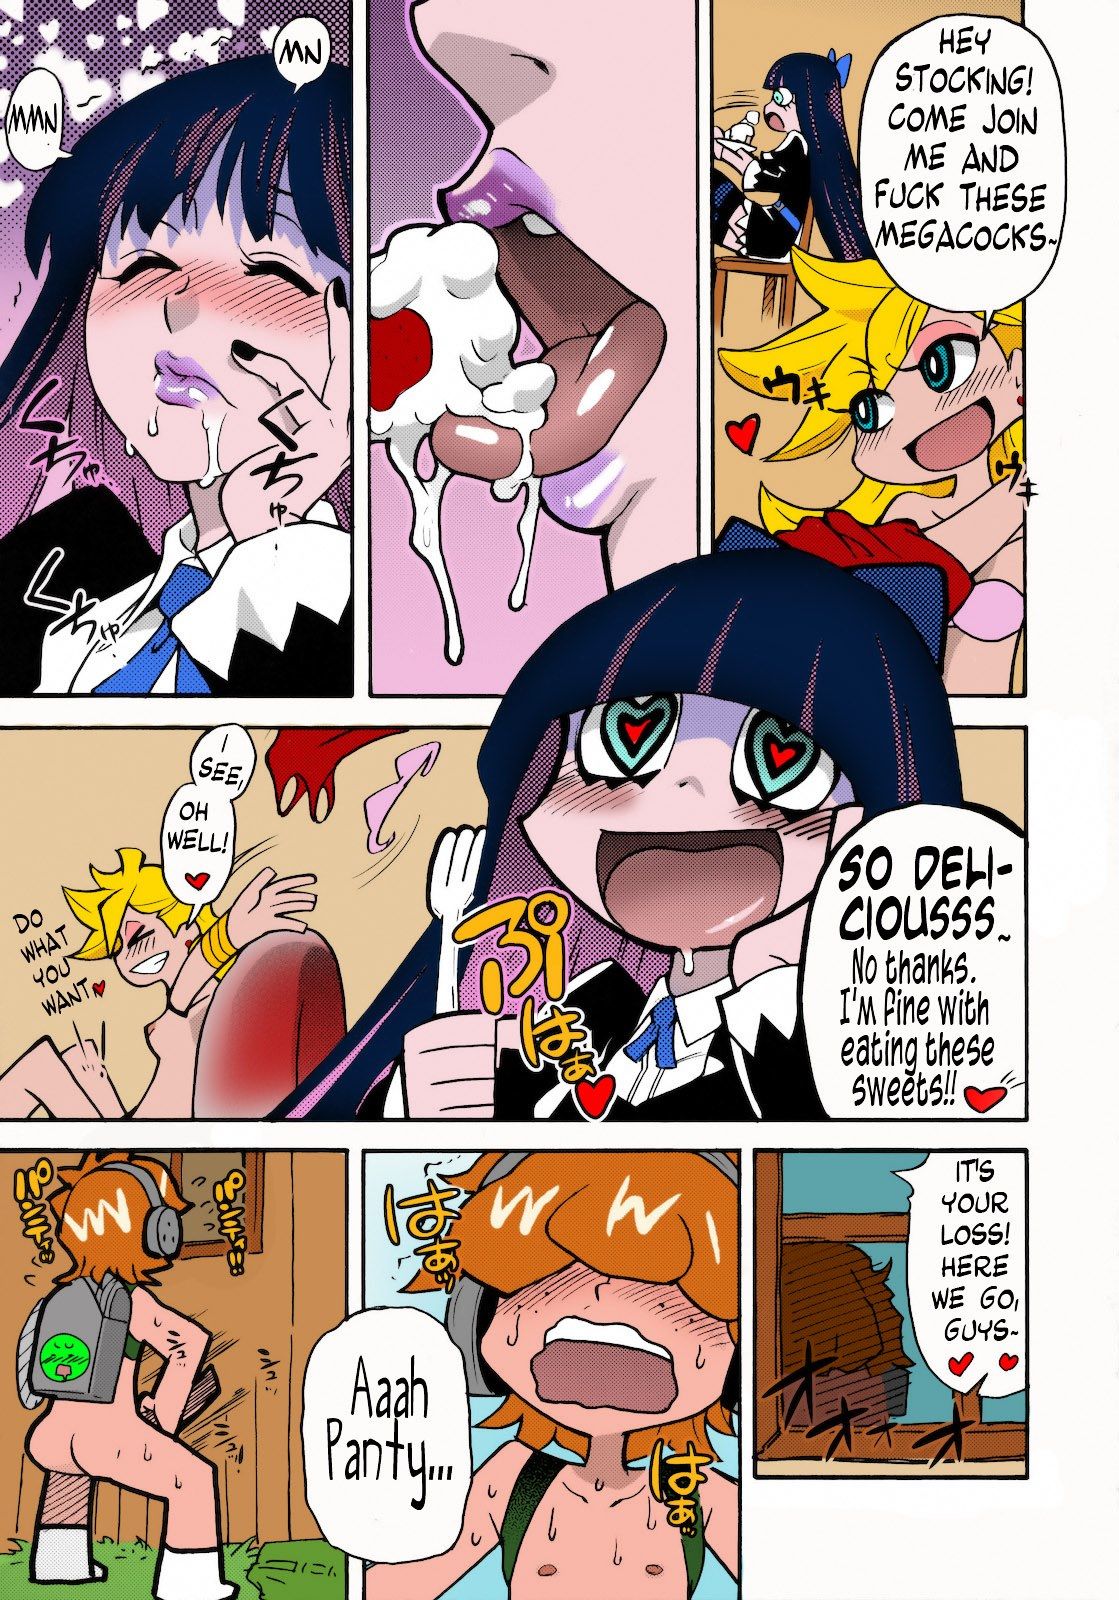 best of Panty stocking